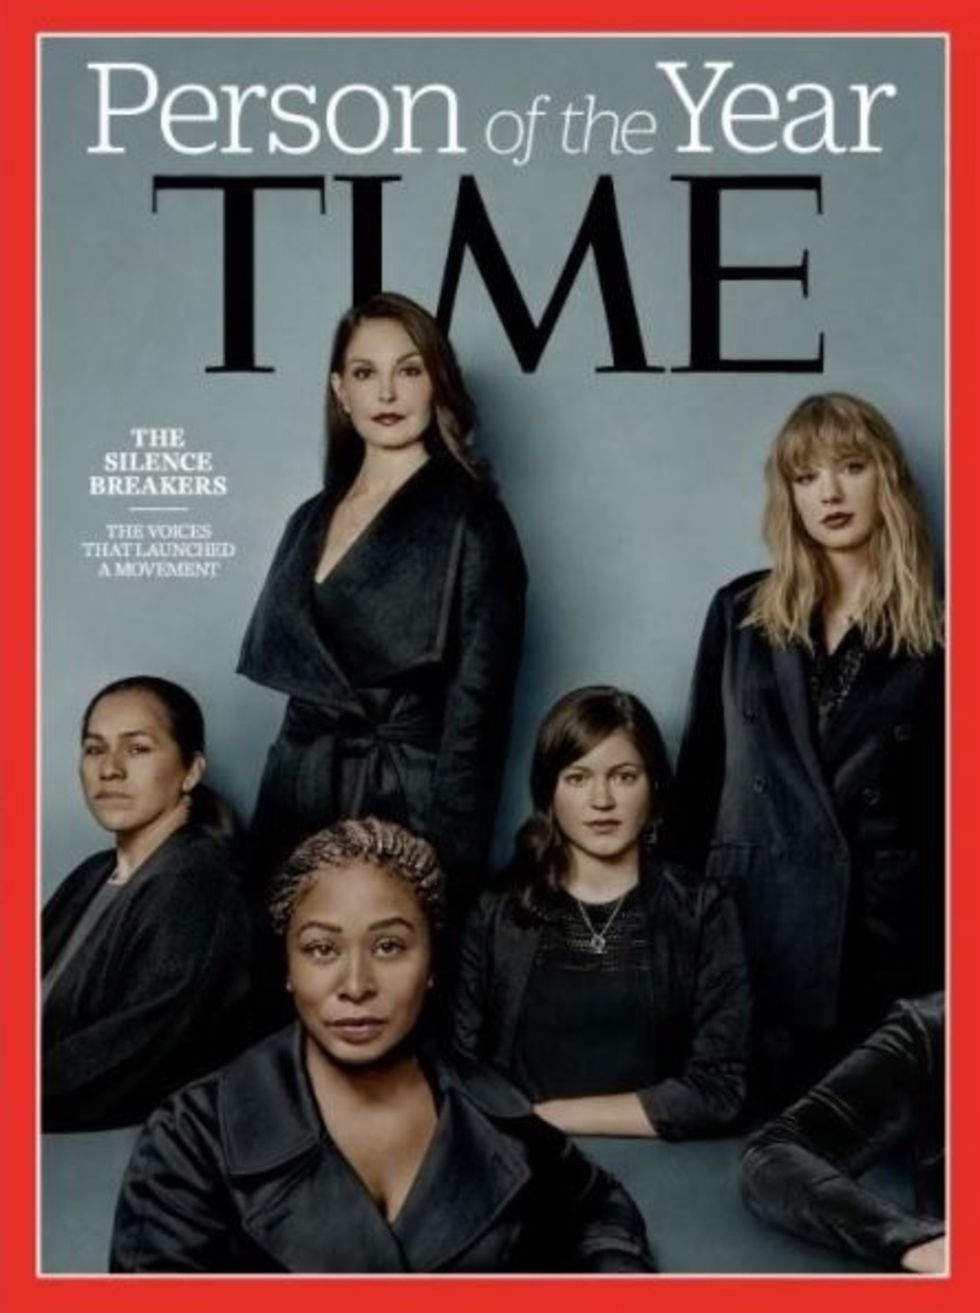 "The Silence Breakers" Are The Most Important Person Of The Year